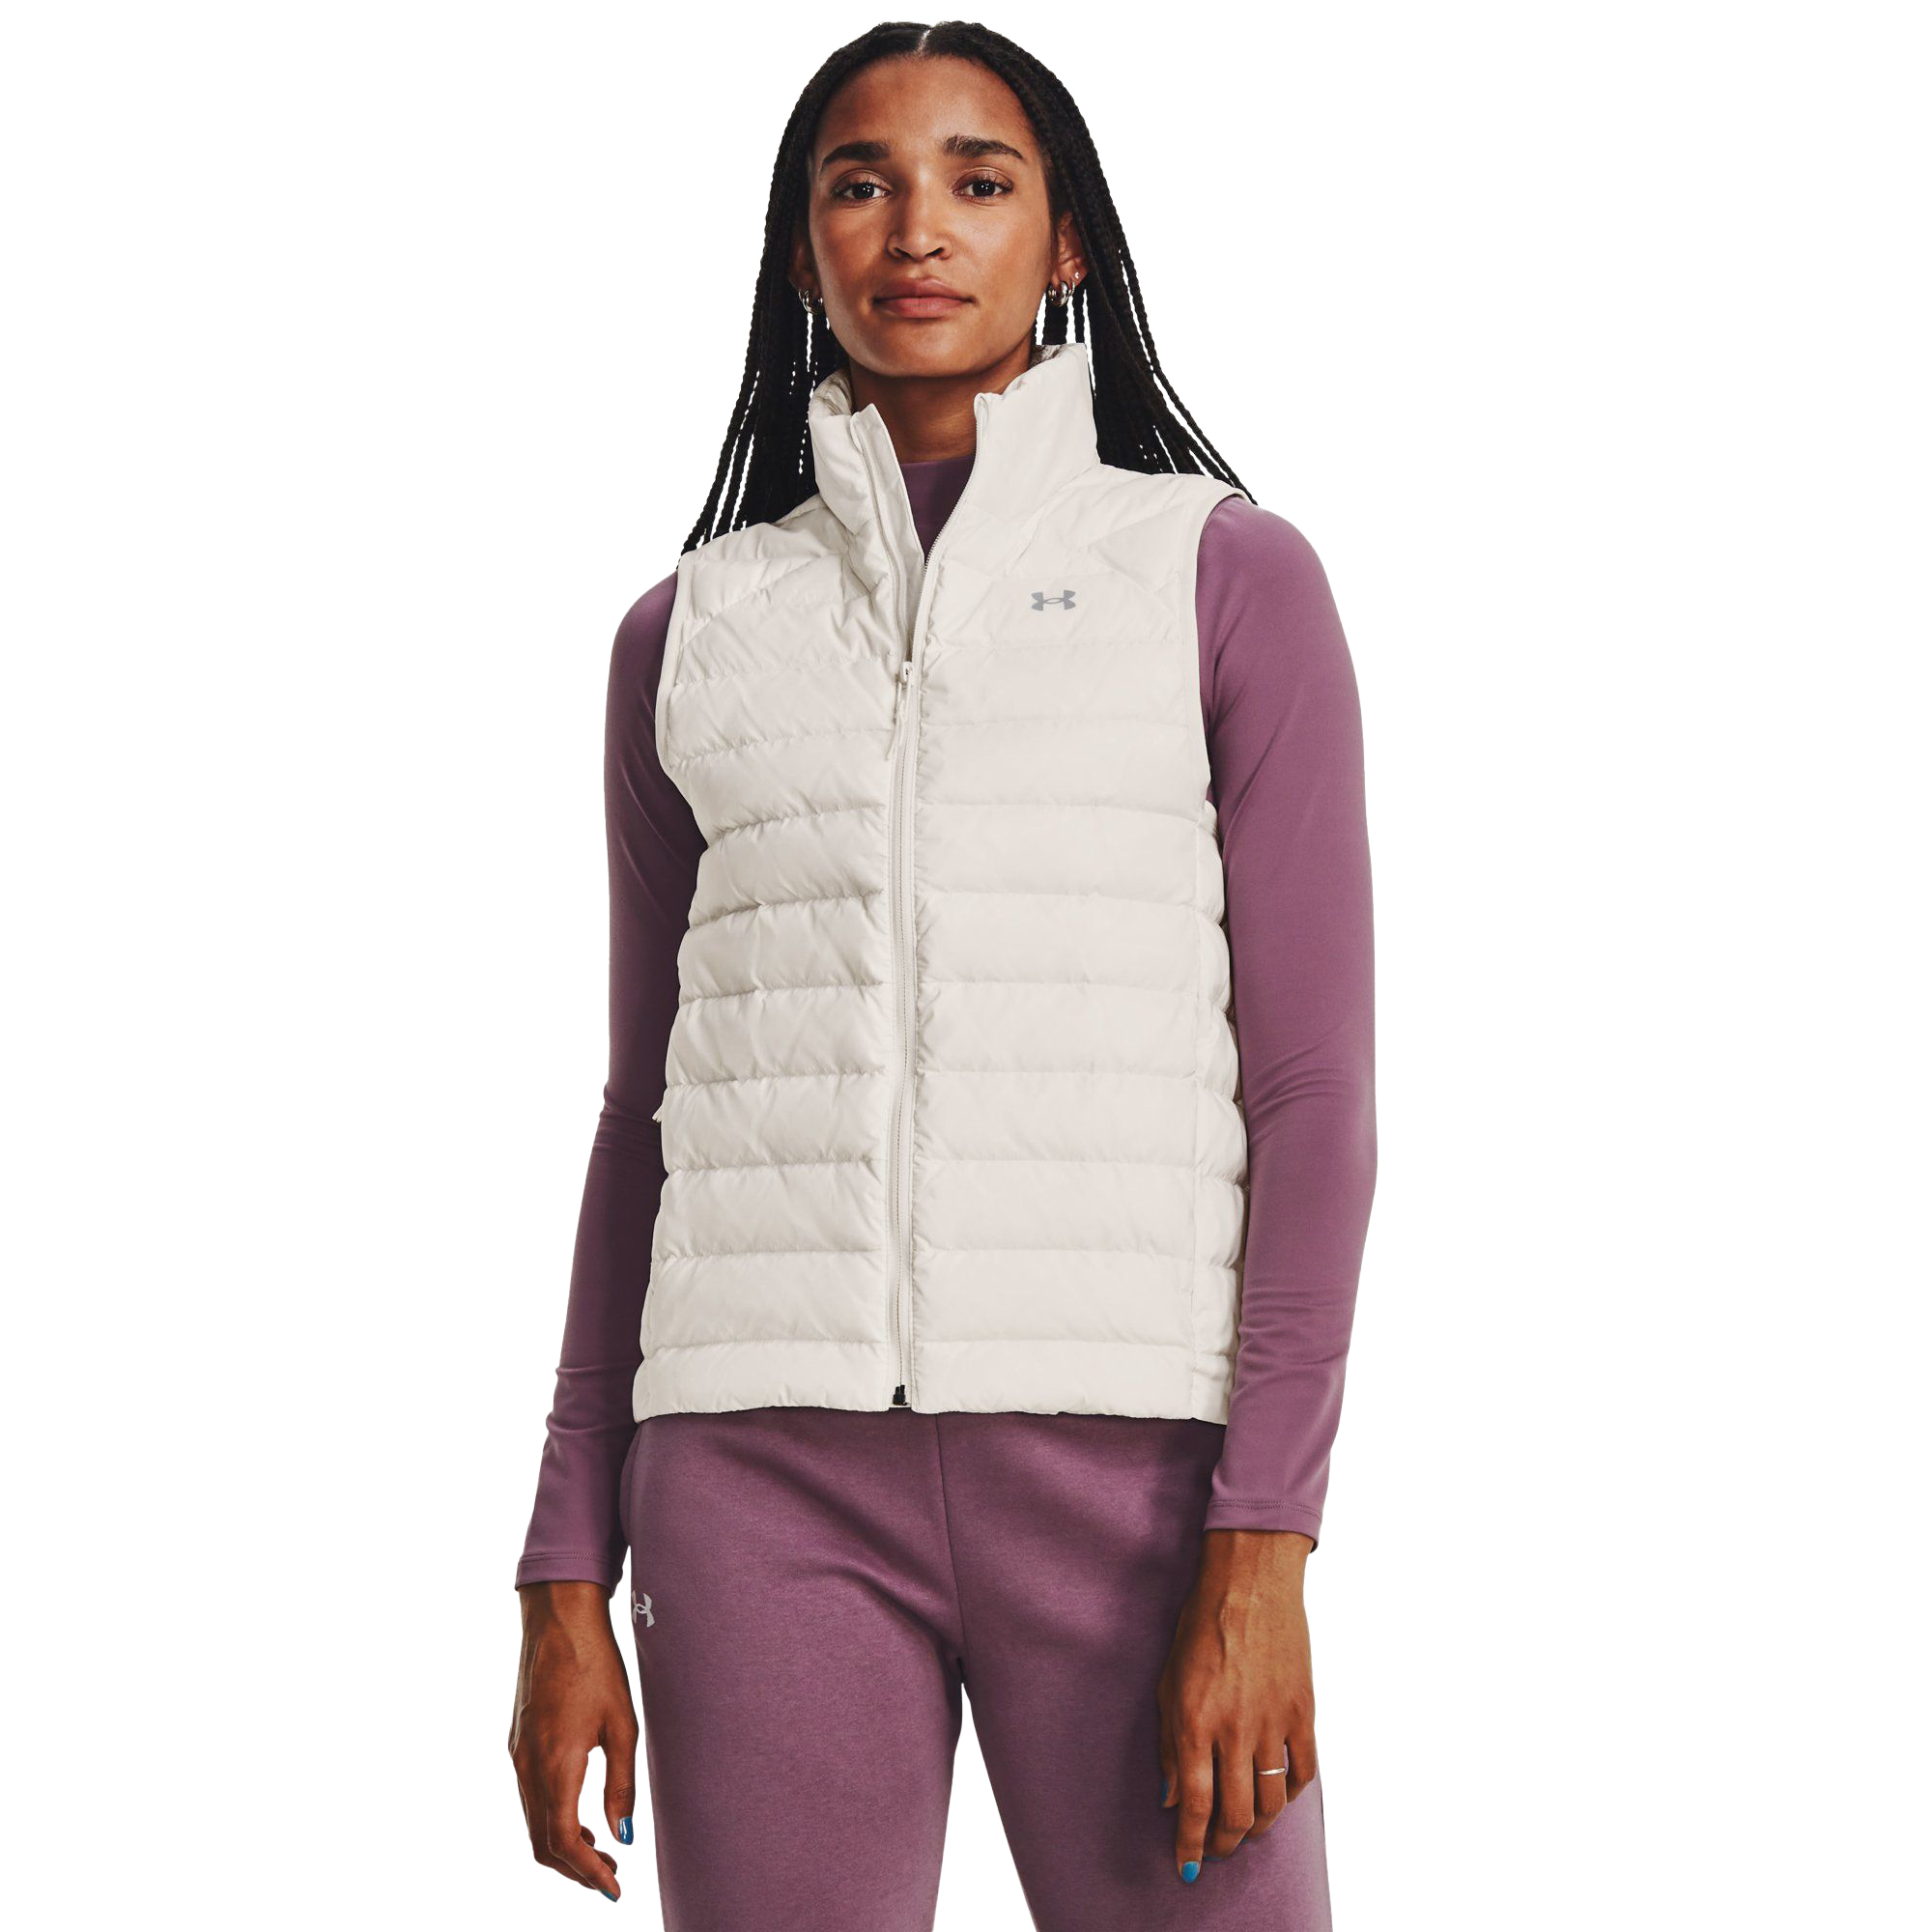 Under Armour Storm Armour Down 2.0 Vest for Ladies - Onyx White/Mod Gray - S